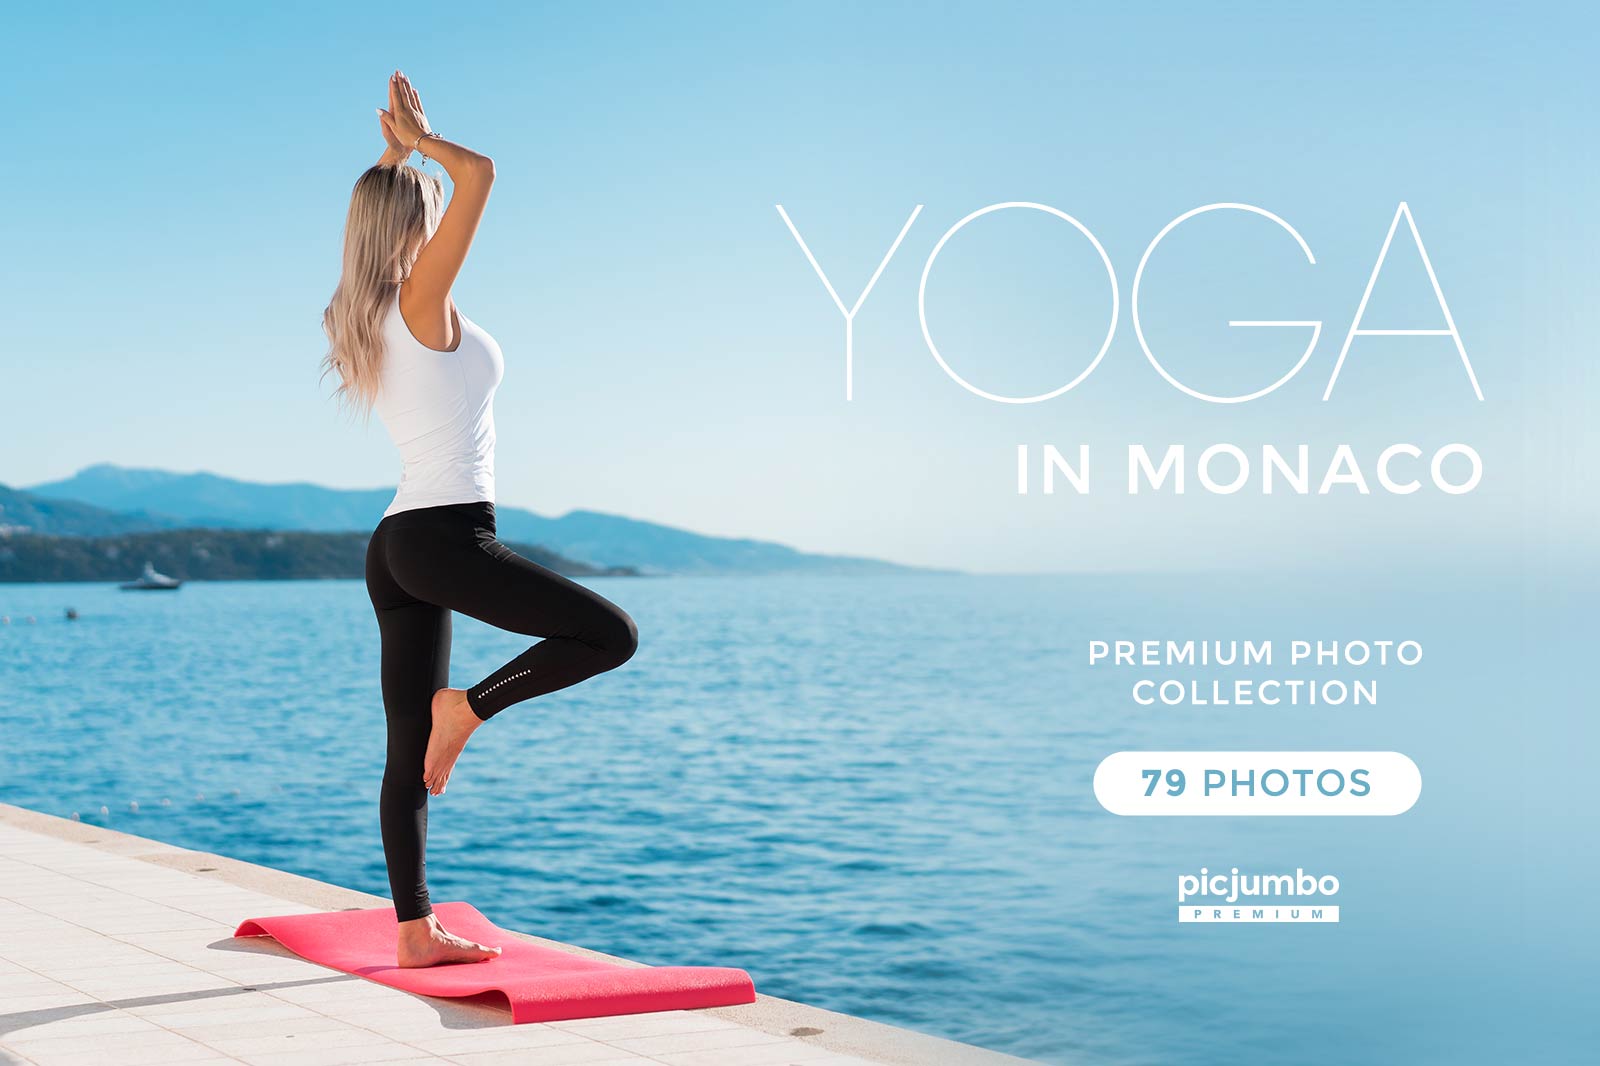 Download hi-res stock photos from our Yoga in Monaco PREMIUM Collection!